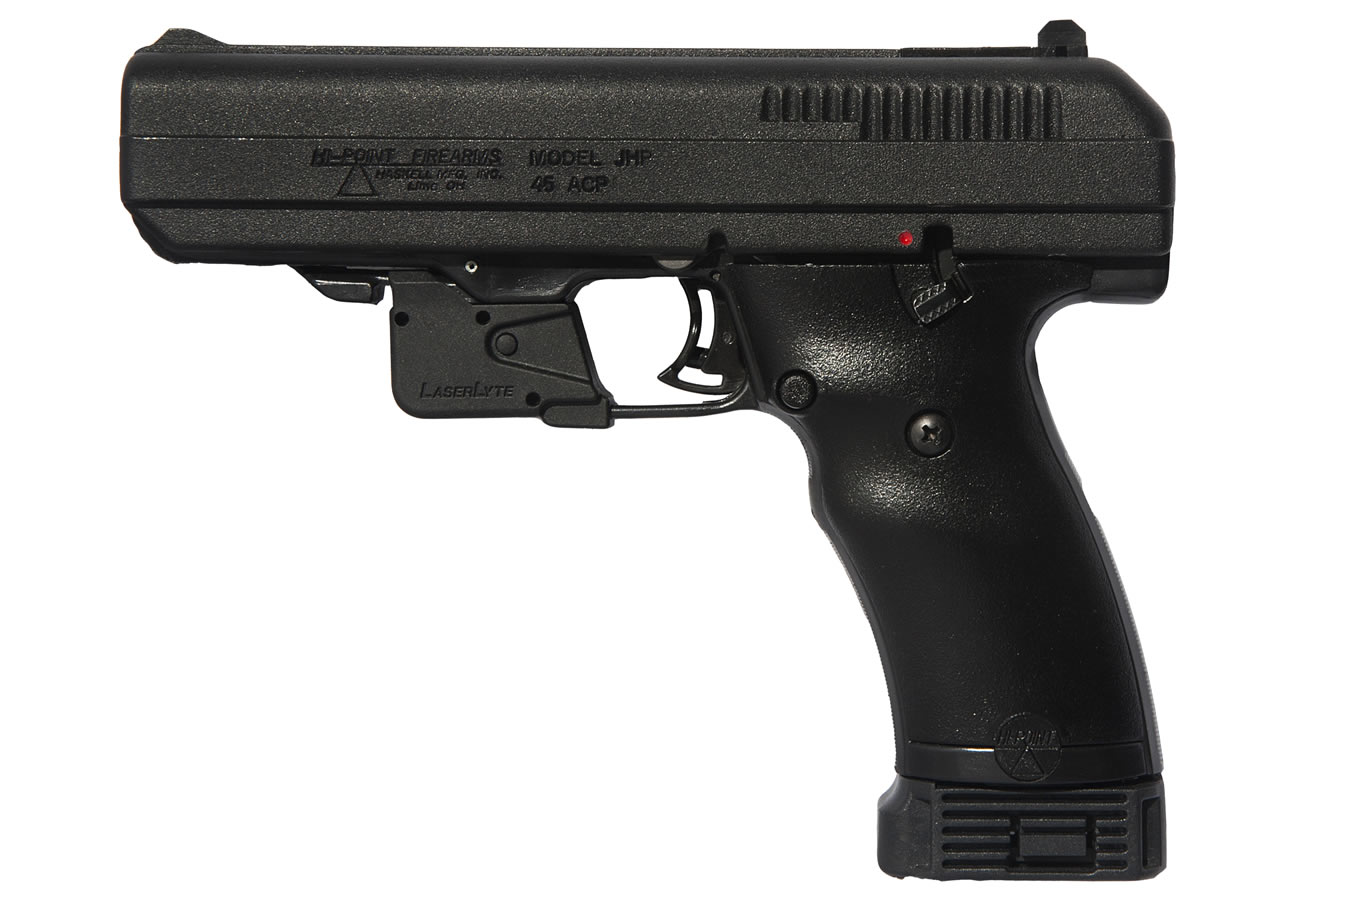 JHP 45 ACP WITH LASER